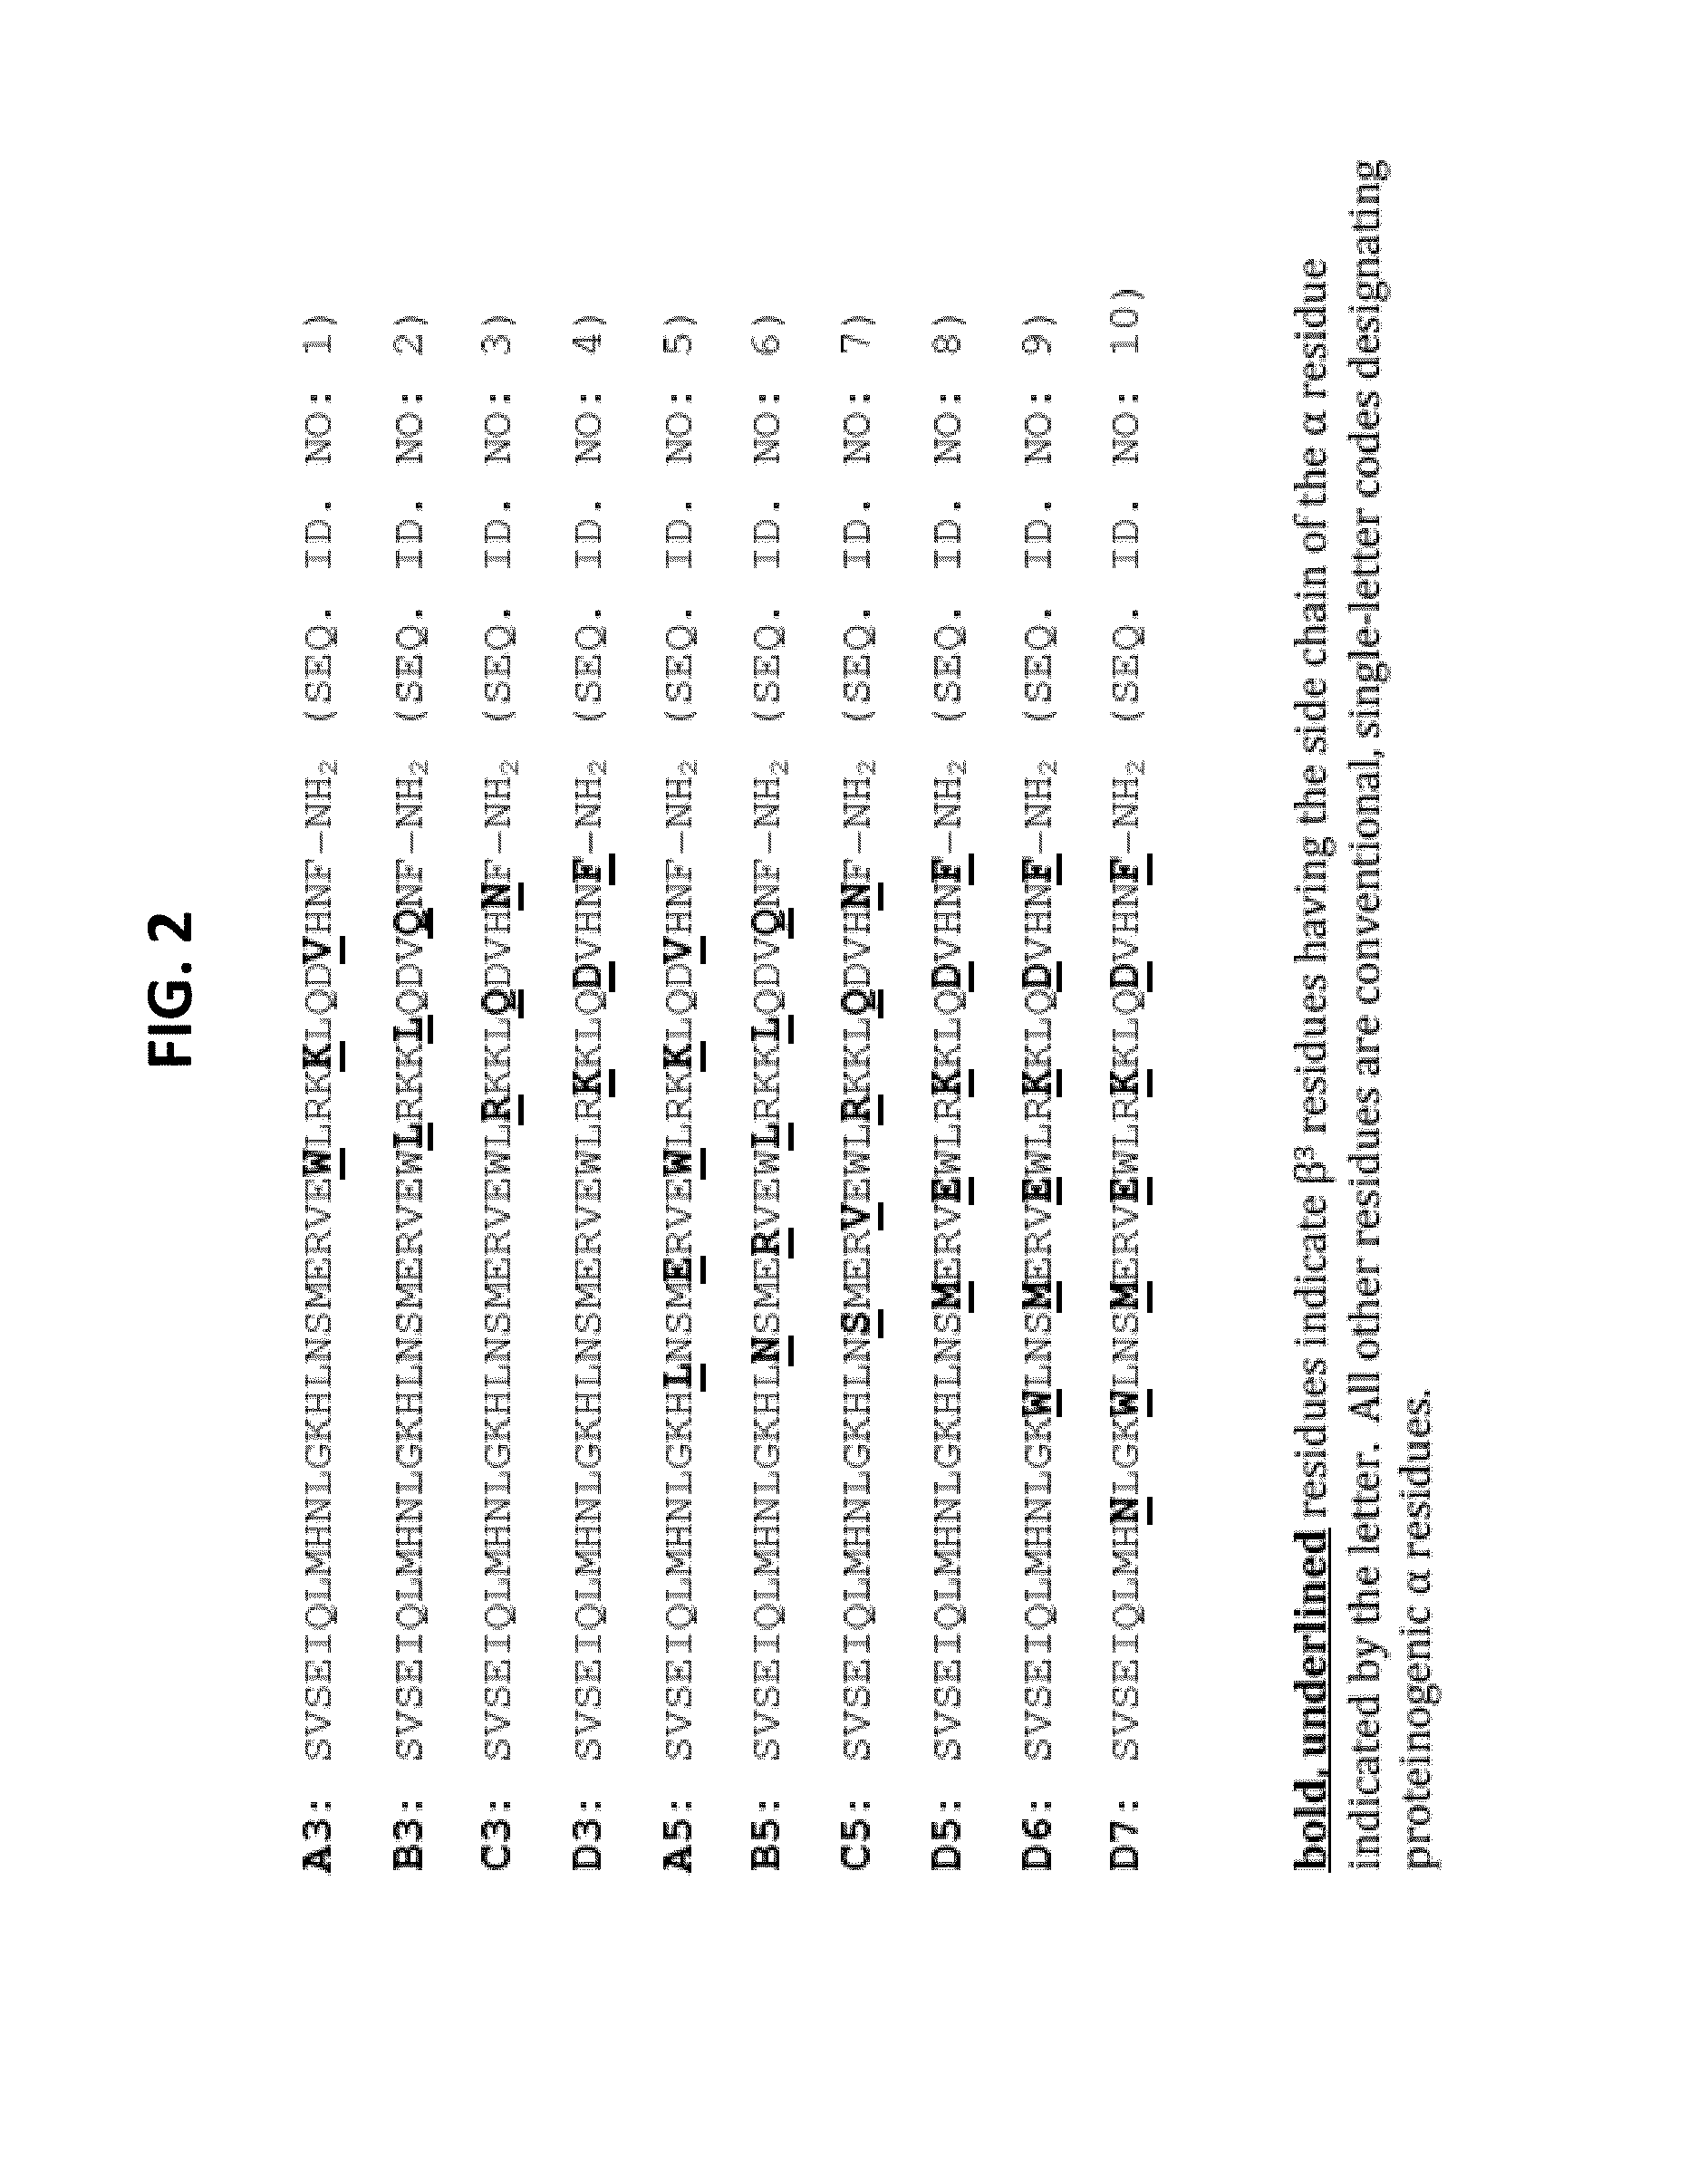 Alpha-/beta-polypeptide analogs of parathyroid hormone (PTH) and method of using same